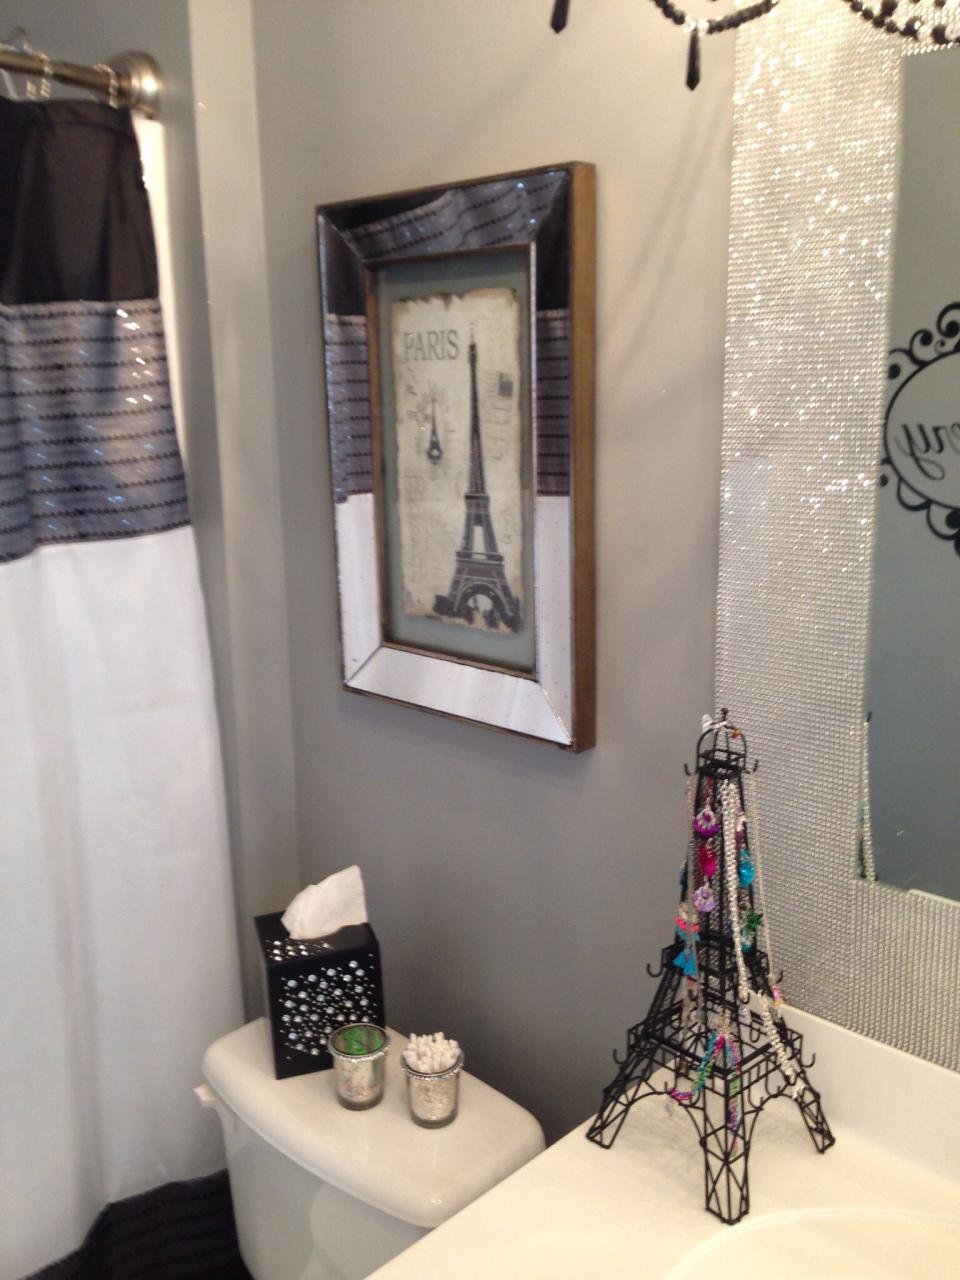 Glitter Painted Walls Valspar Paint with 6 Bags of Glitter. Did my